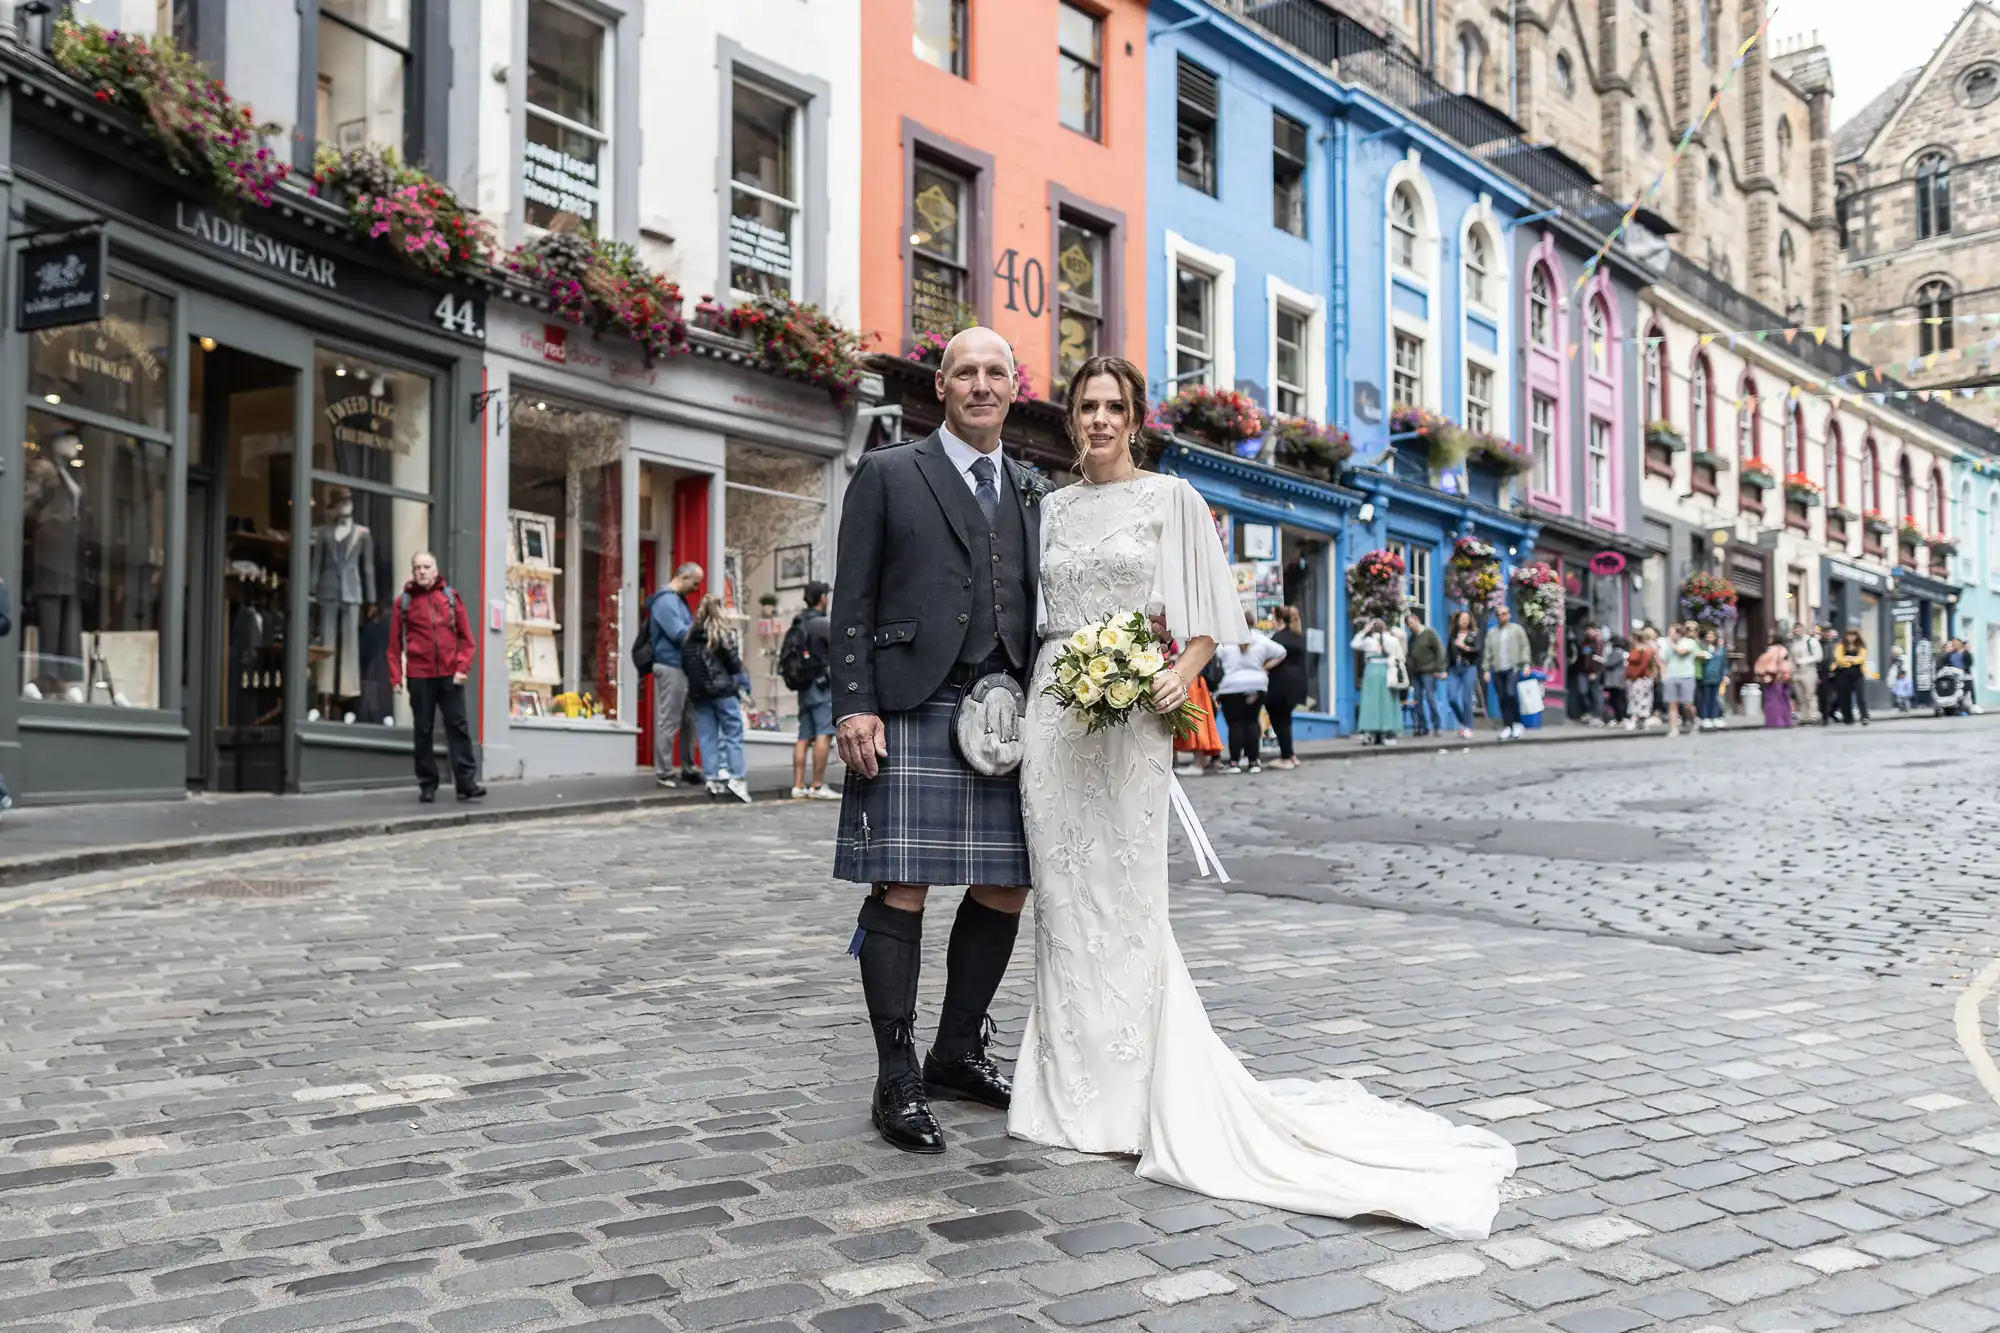 A couple dressed in wedding attire stands on a cobblestone street in front of a row of colorful buildings. The groom wears a kilt, and the bride holds a bouquet. People can be seen in the background.